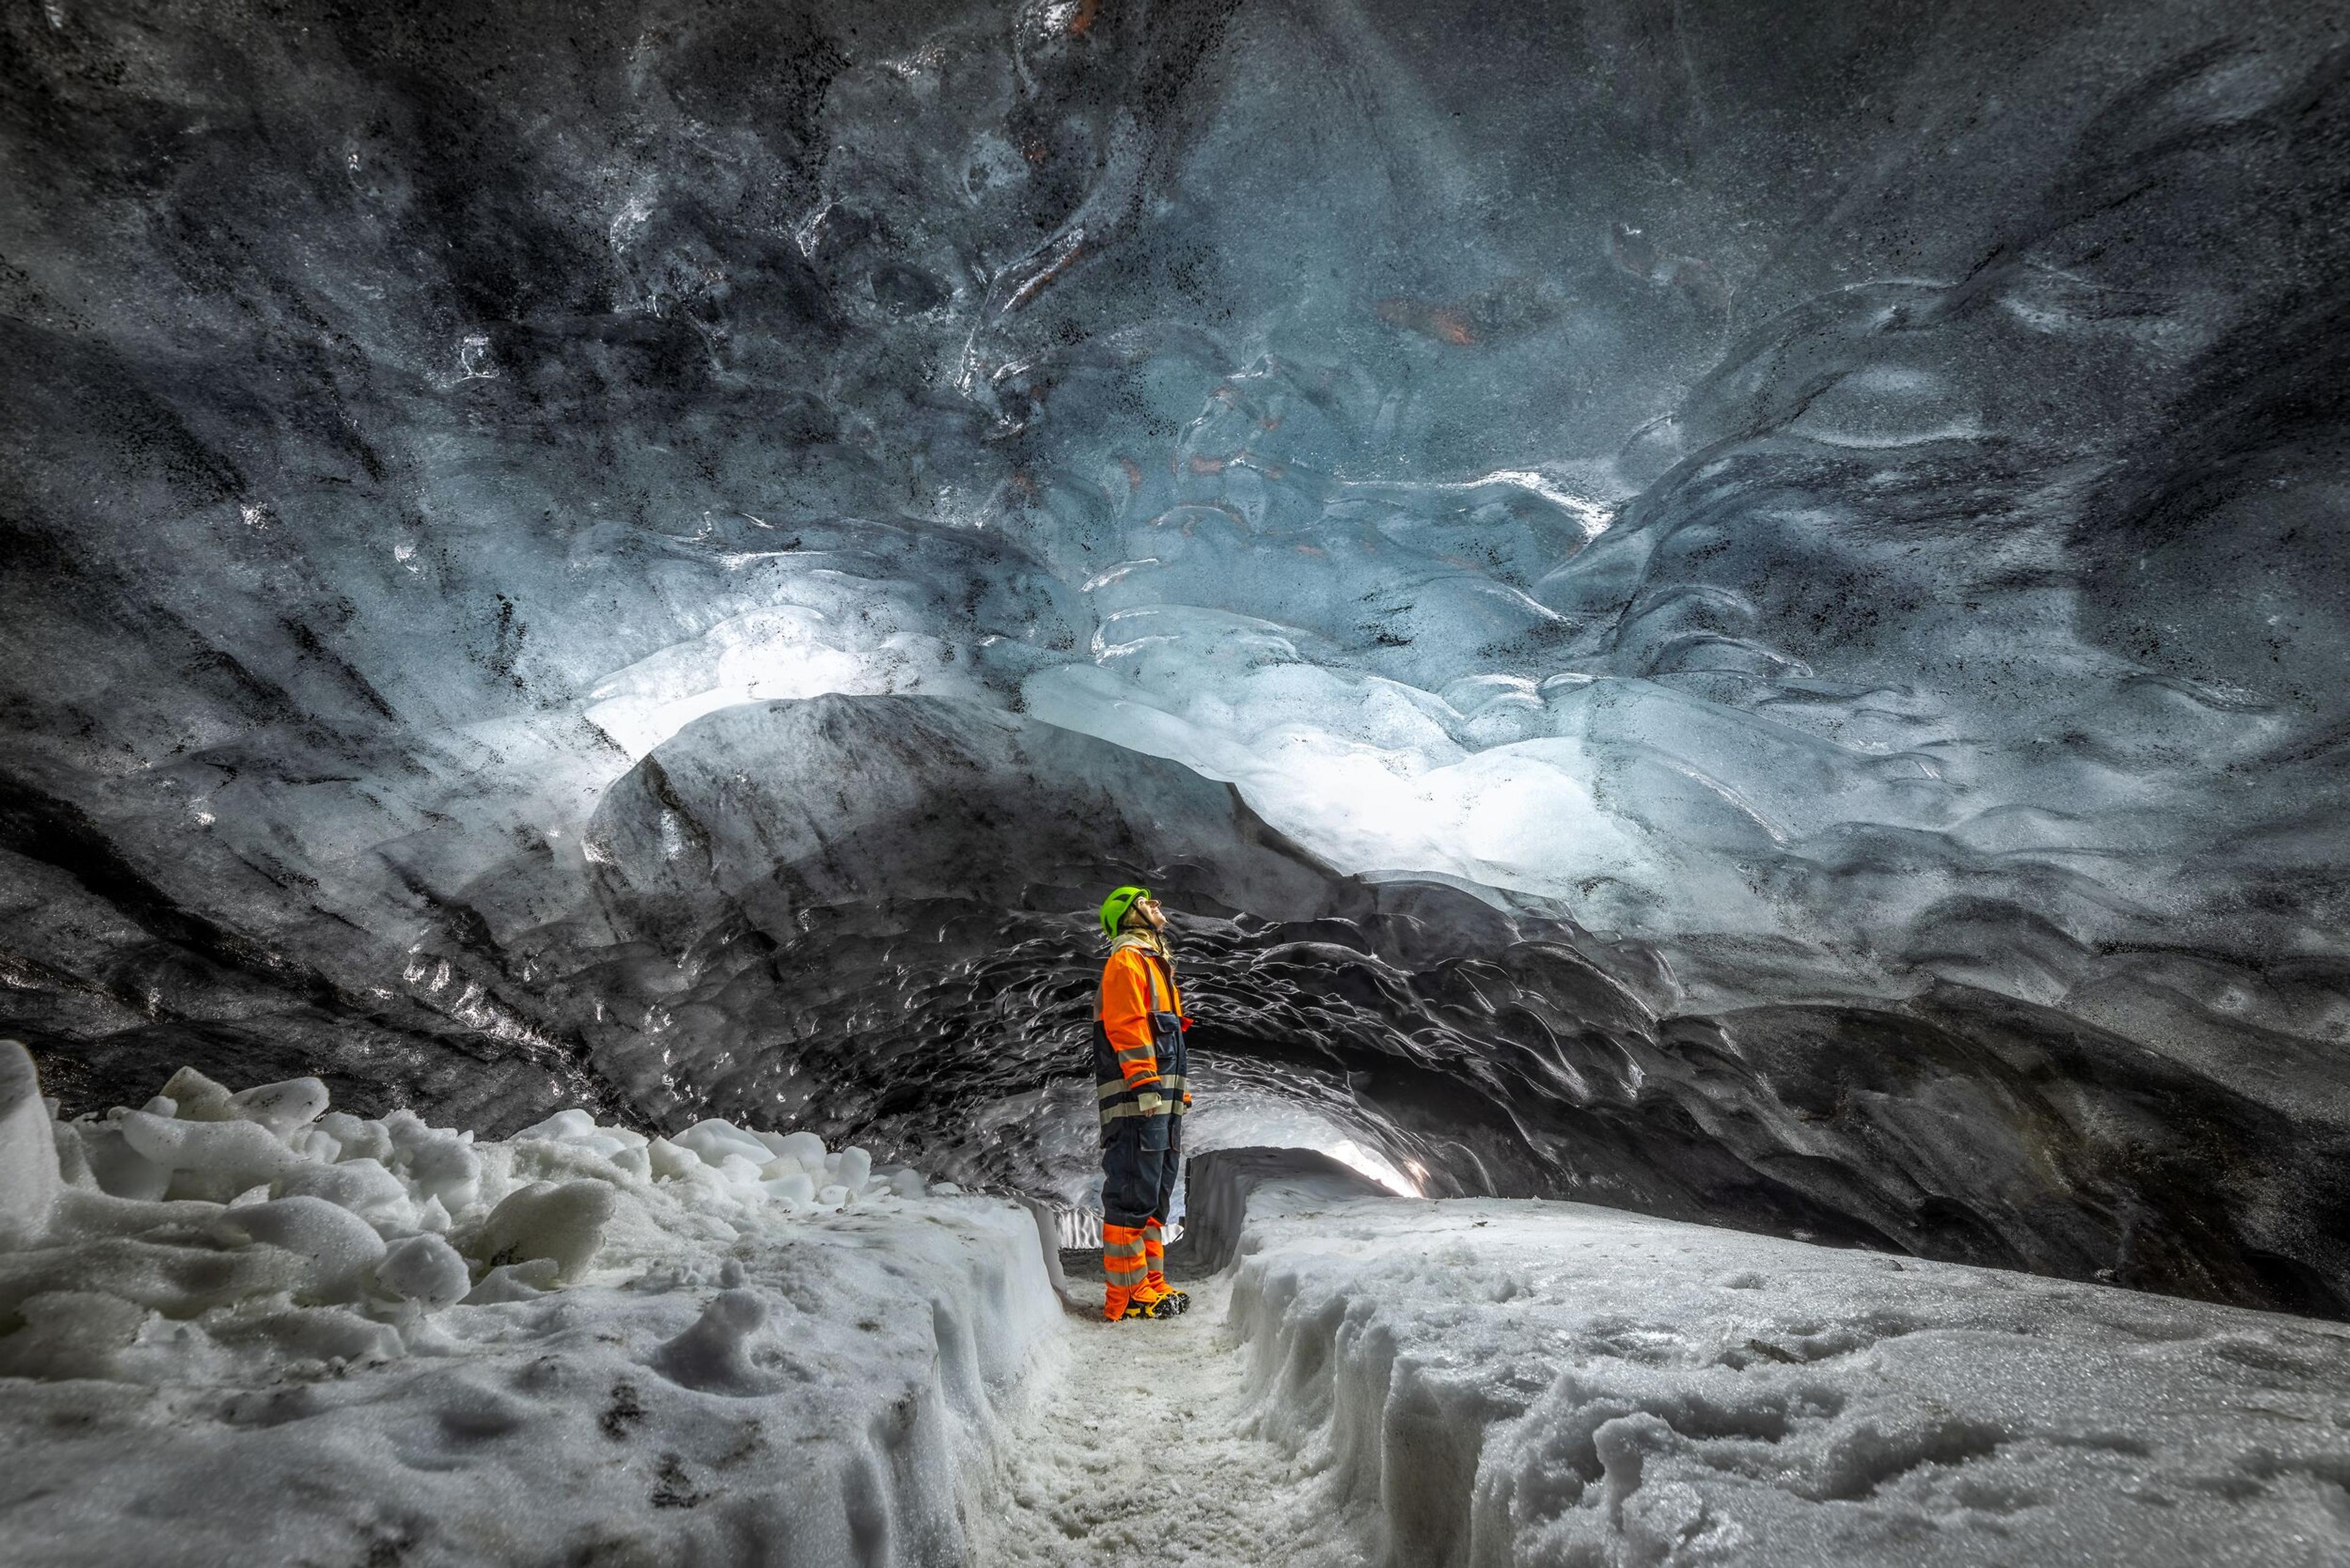 Person in orange and black suit standing in Askur ice cave, surrounded by ice and snow with a glowing ceiling.